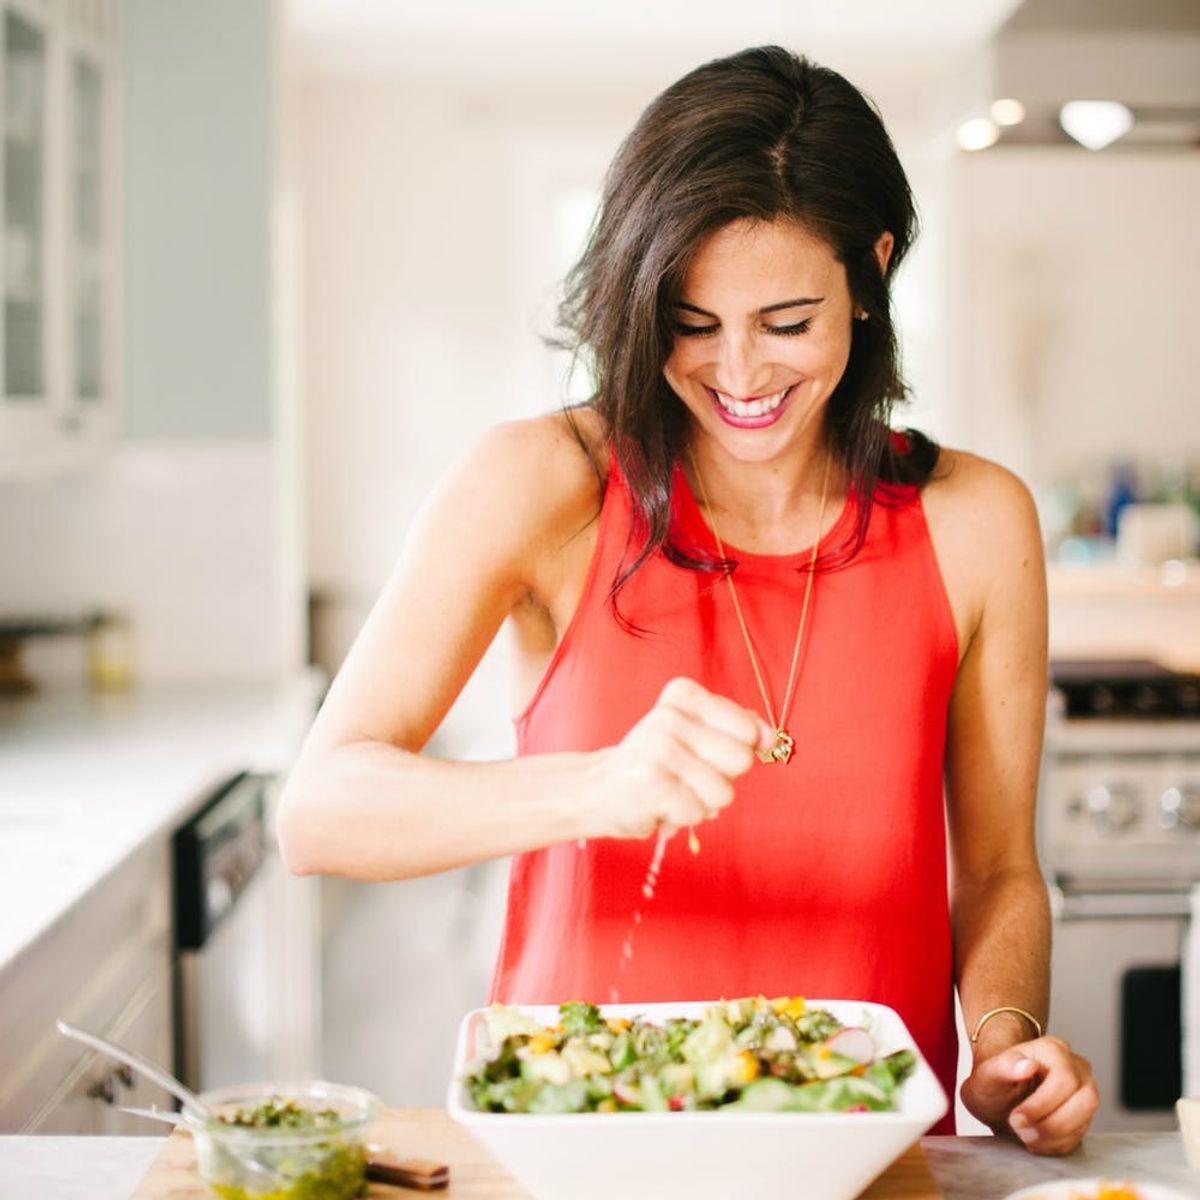 This Woman Will Teach You How to Eat Better and Save Money